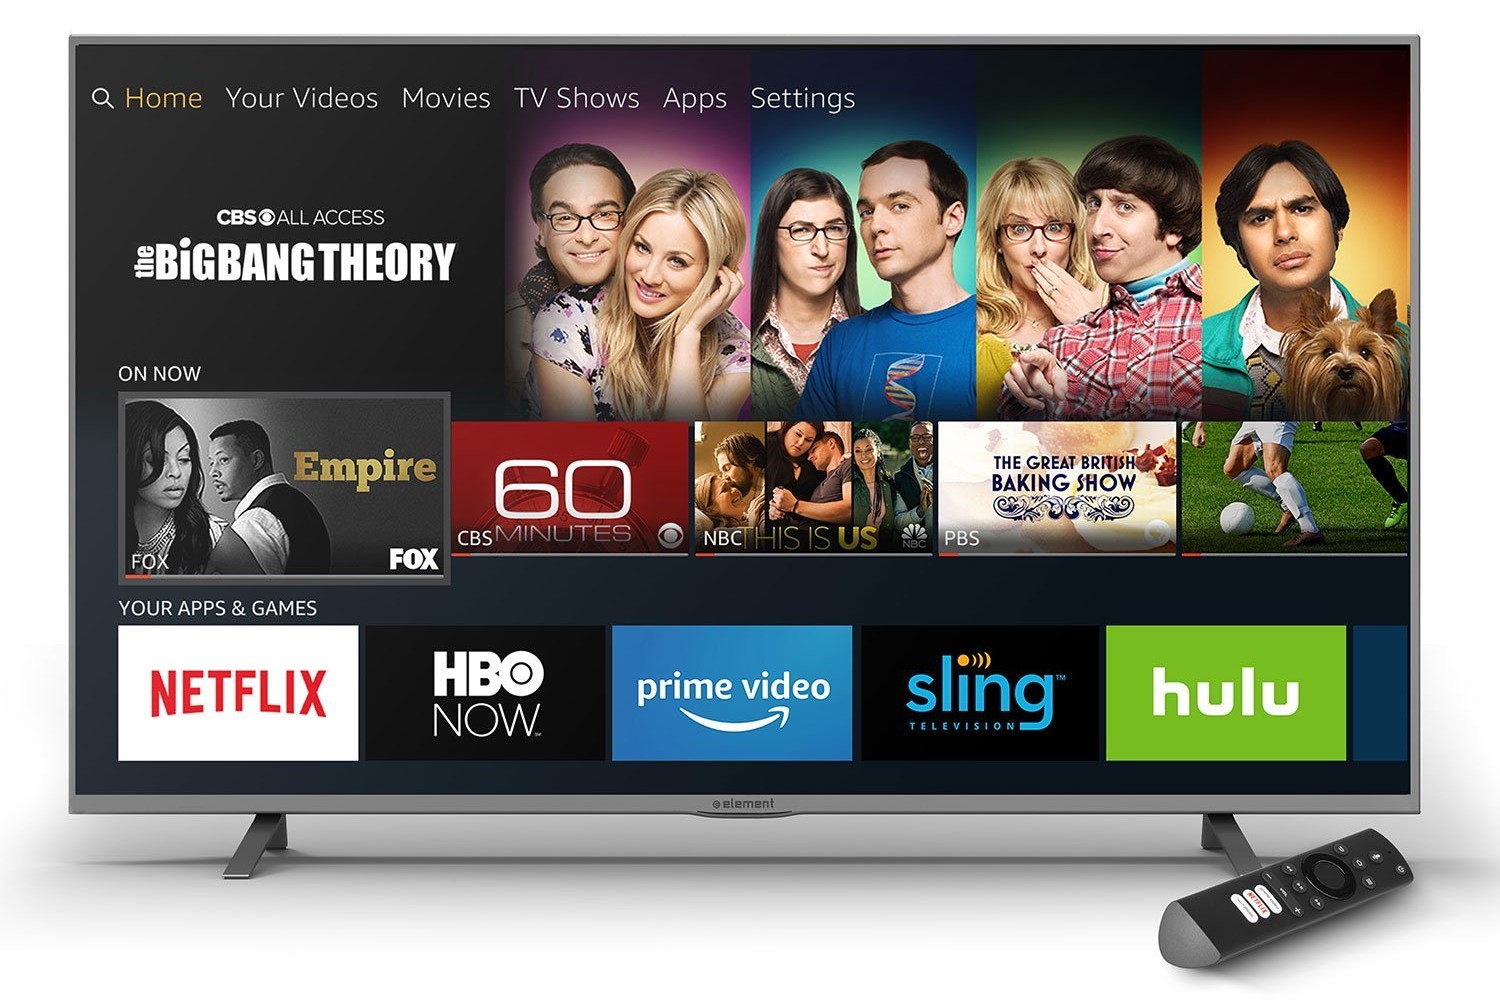 Amazon Fire TV Smart TVs Are Back in Stock Starting at $299 for a 50″ Smart TV